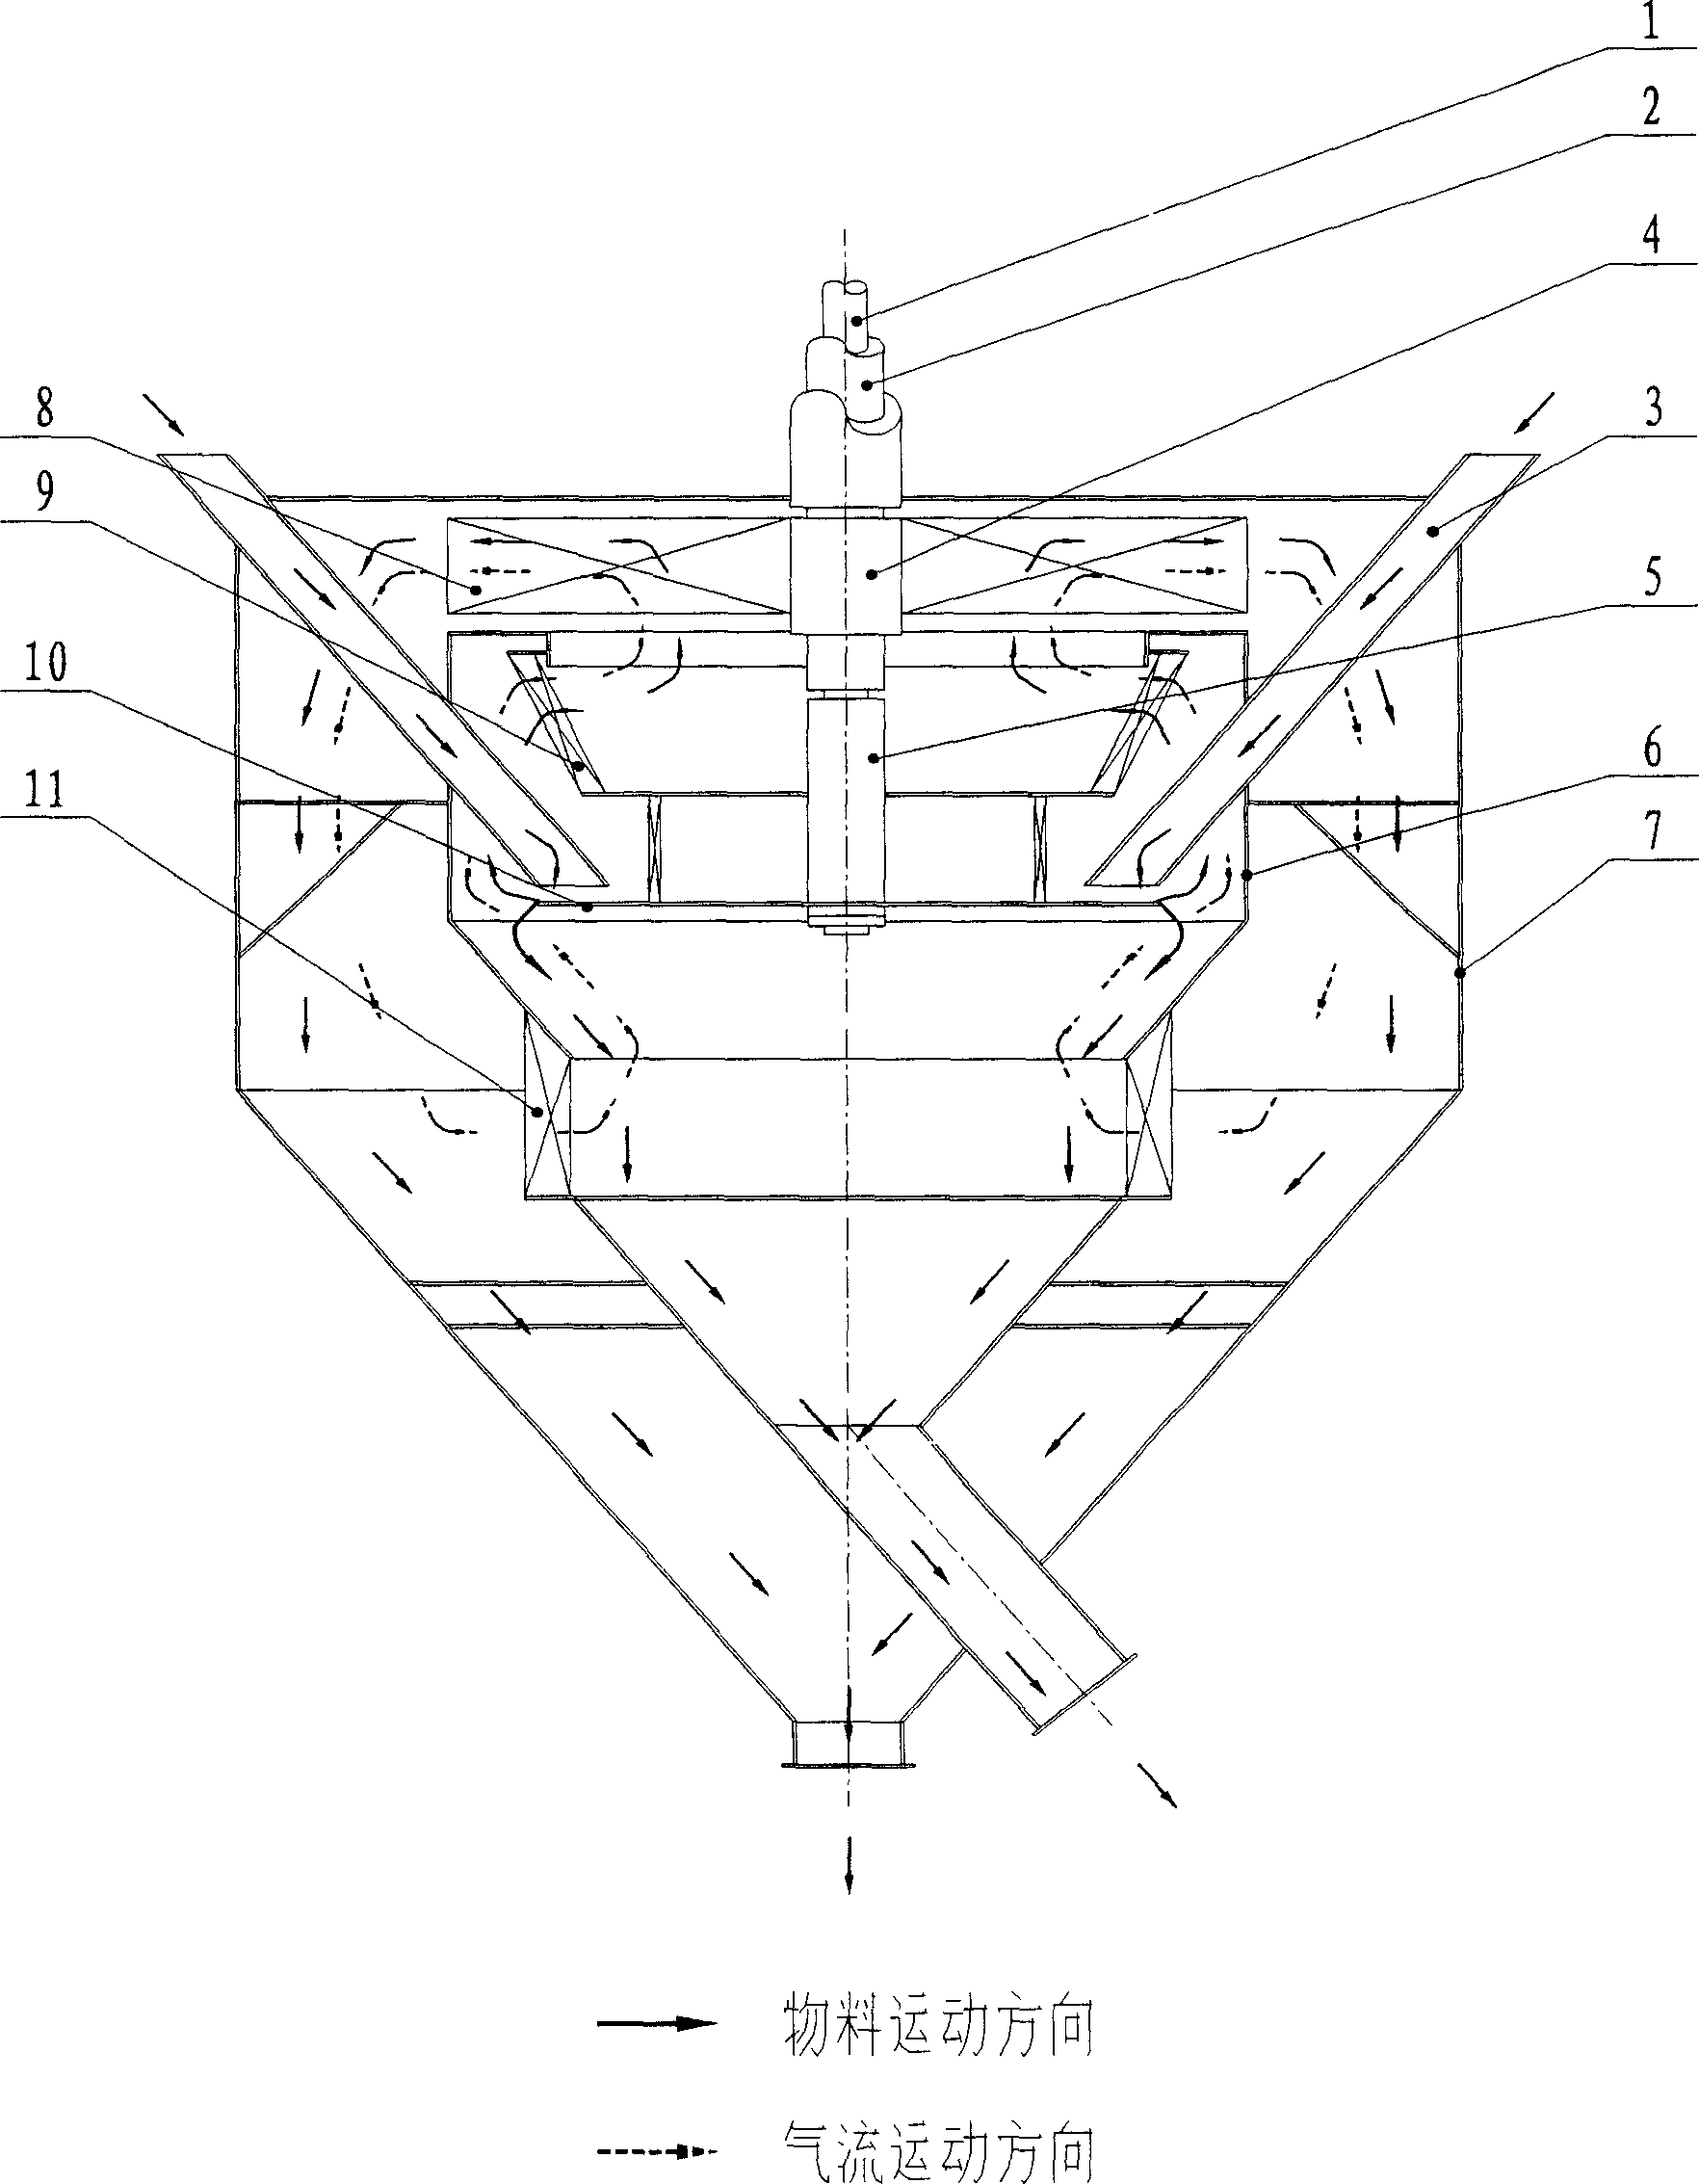 Combined powder selector with double wheel differential motion